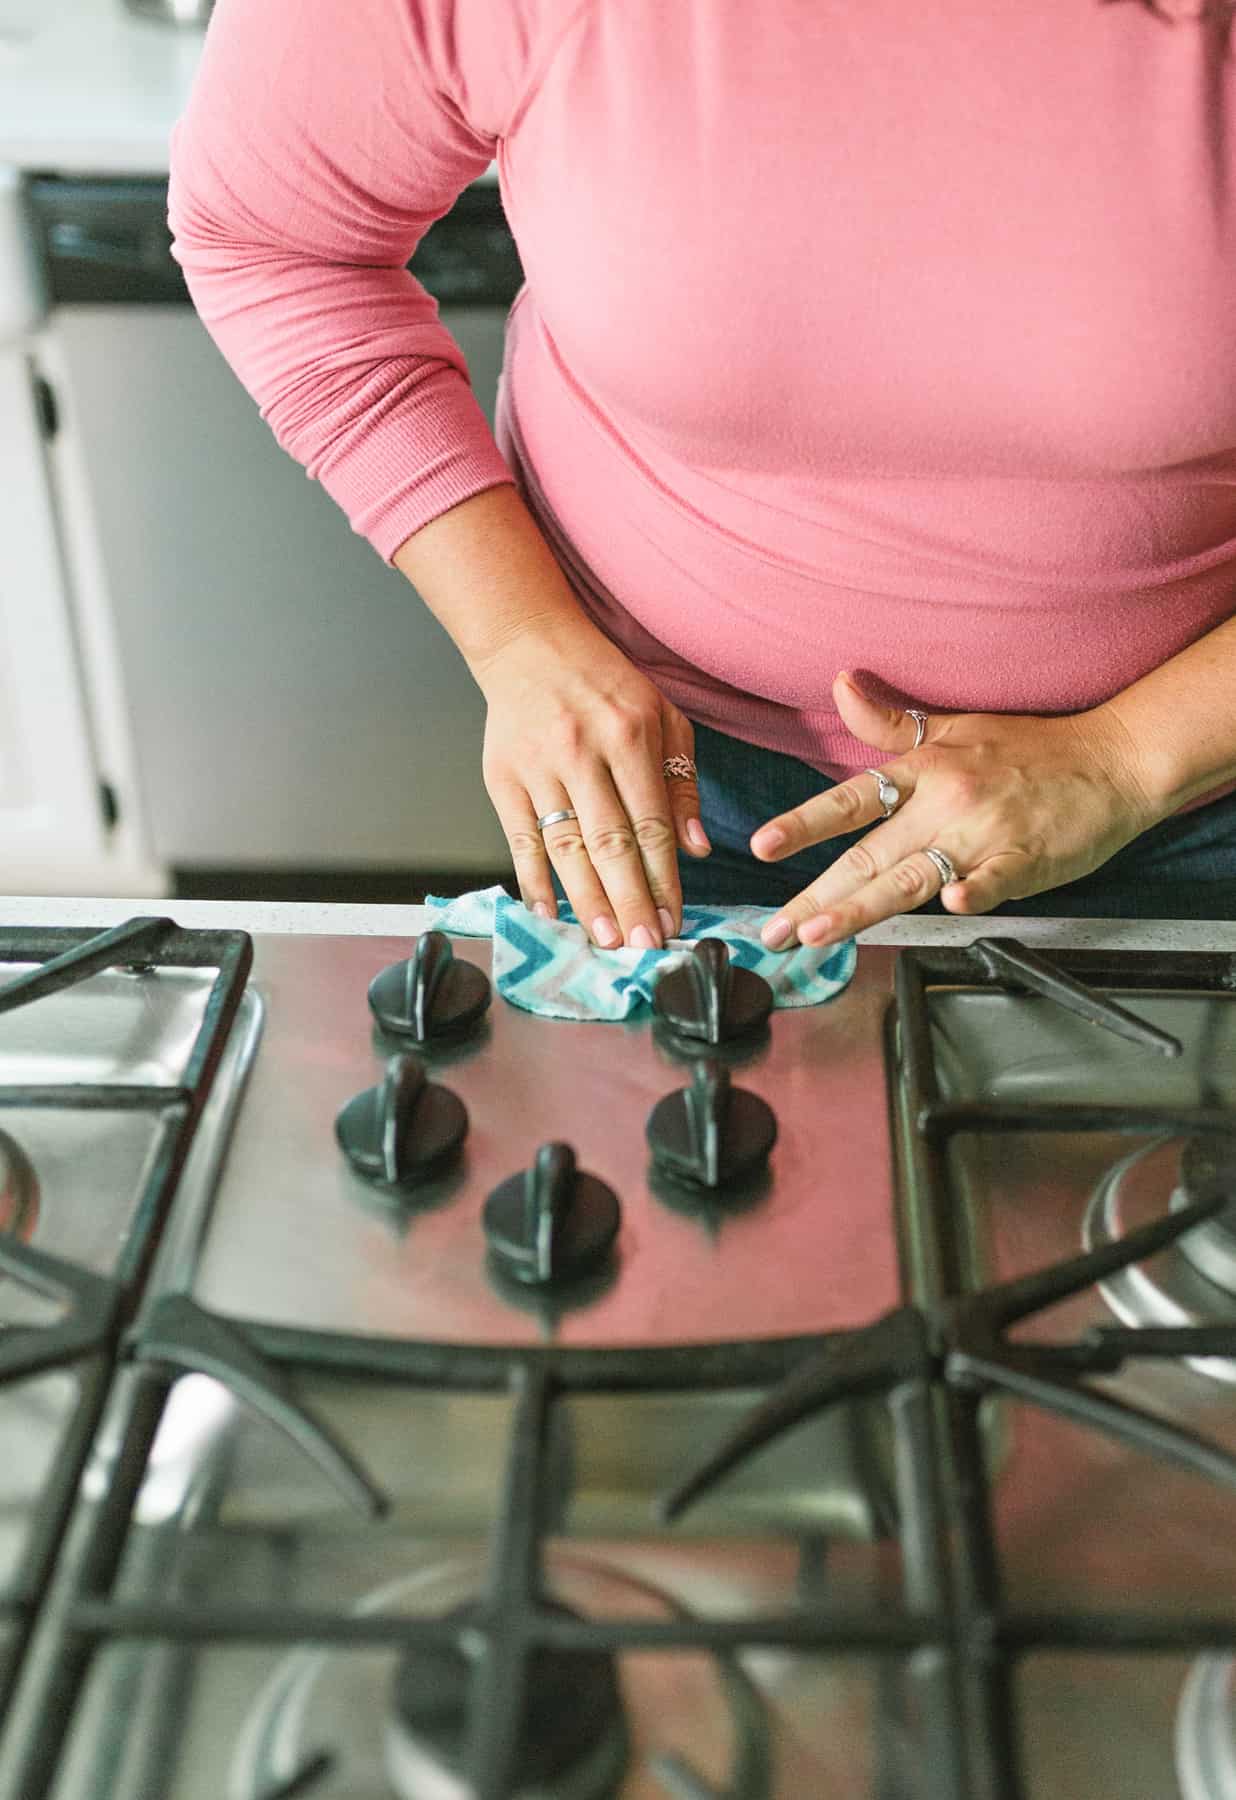 Woman using a reusable cleaning wipe to clean a stovetop.